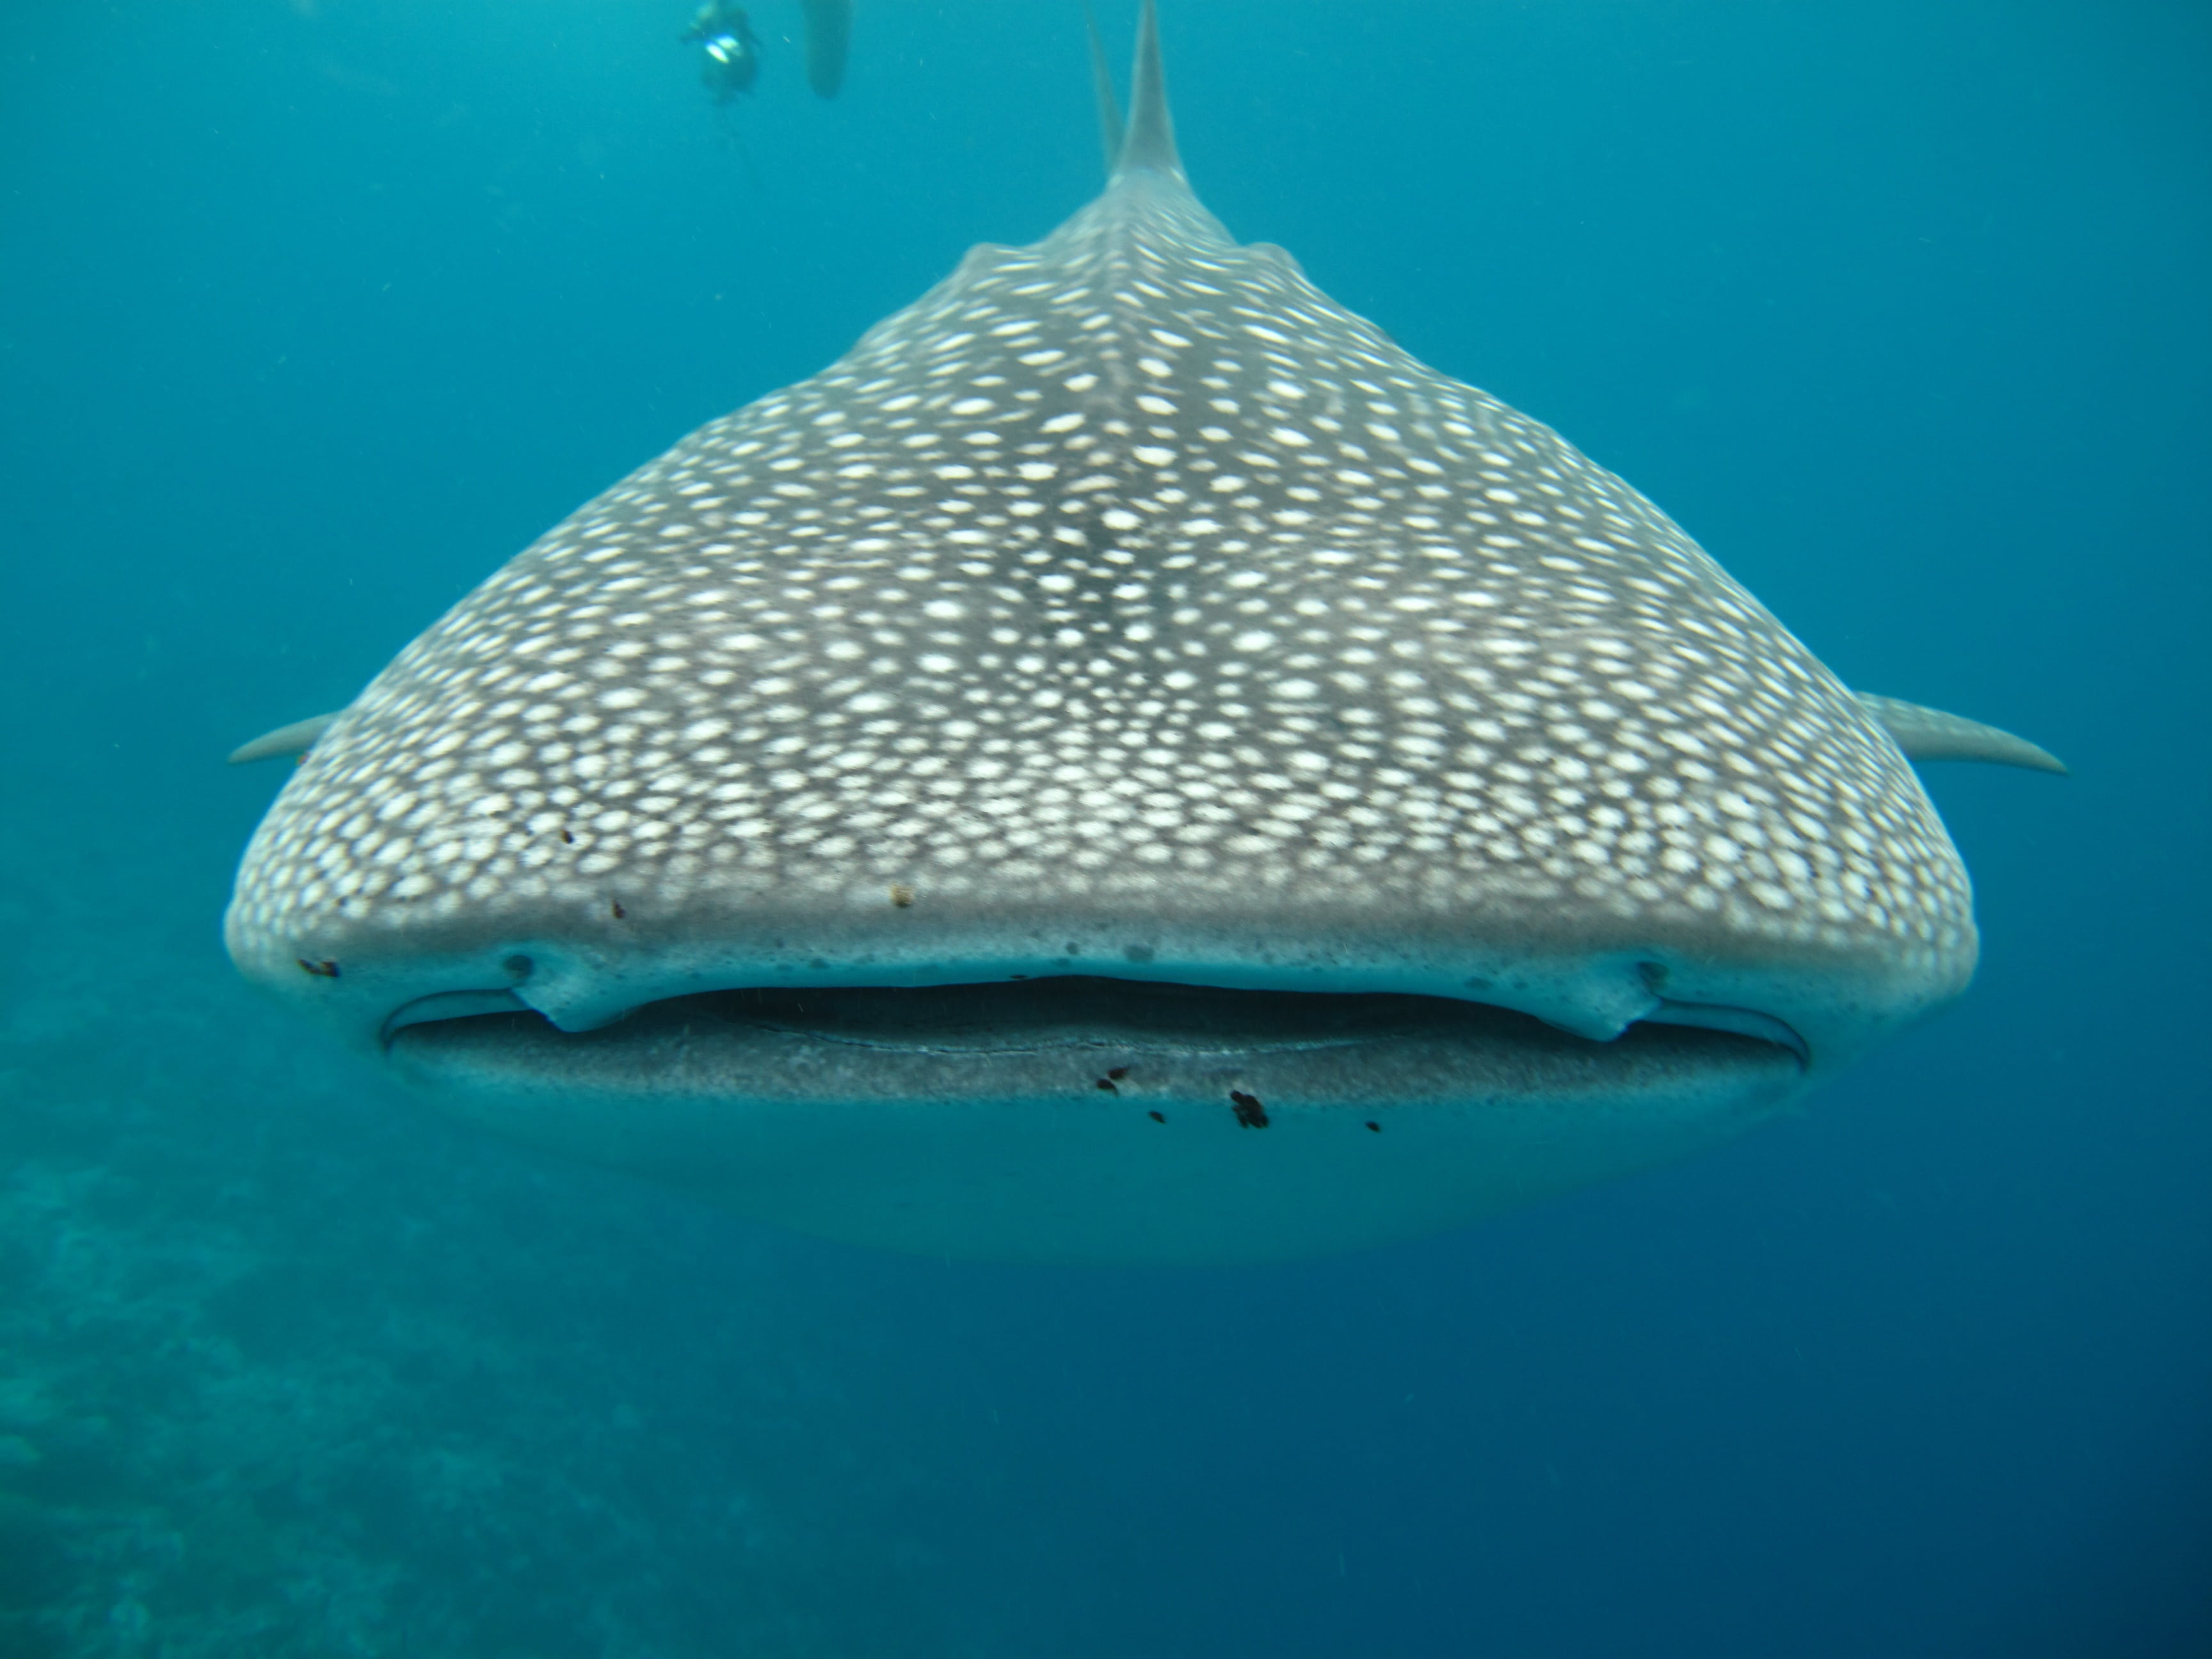 gray and white whale shark in body of water, maldives, sea, fish